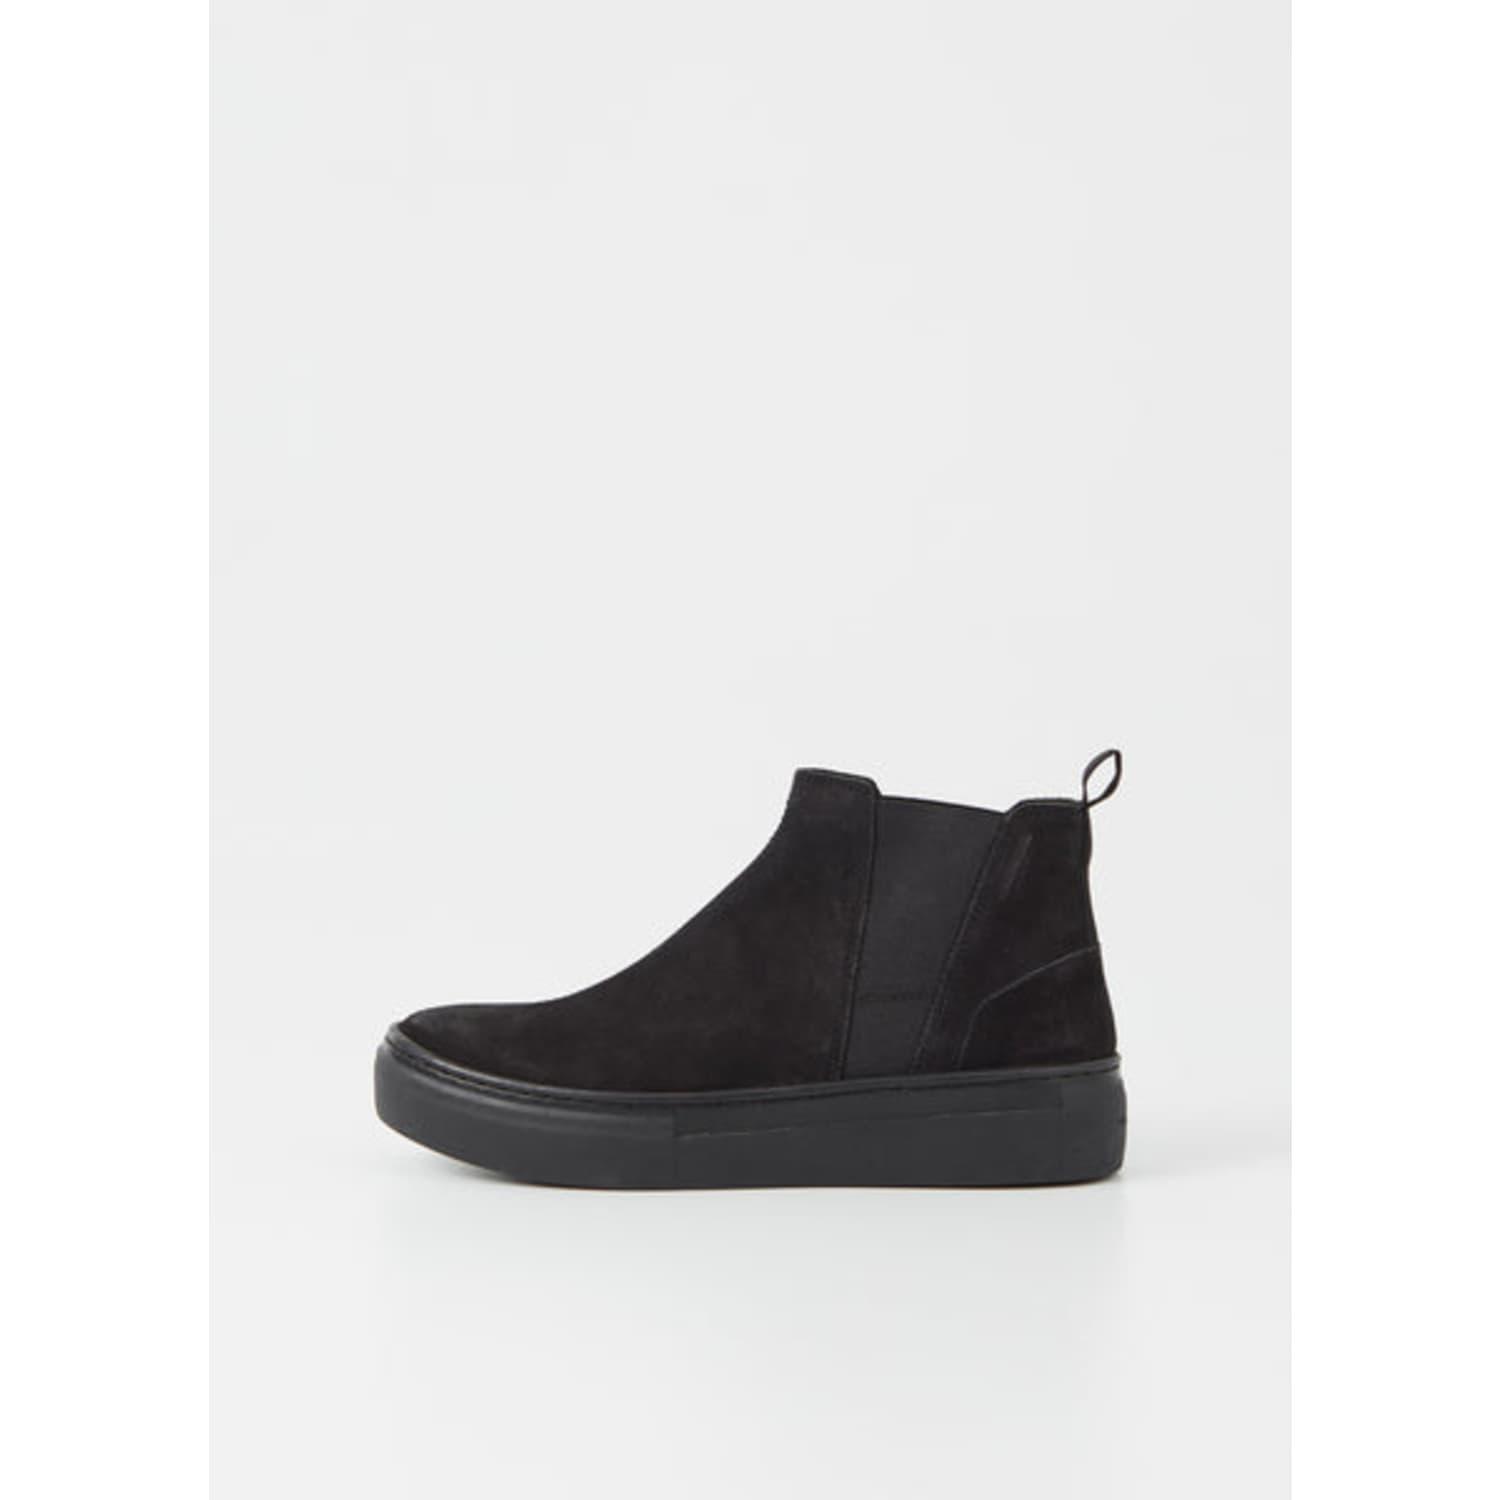 Vagabond Shoemakers Synthetic Zoe Platform Boot in Black | Lyst